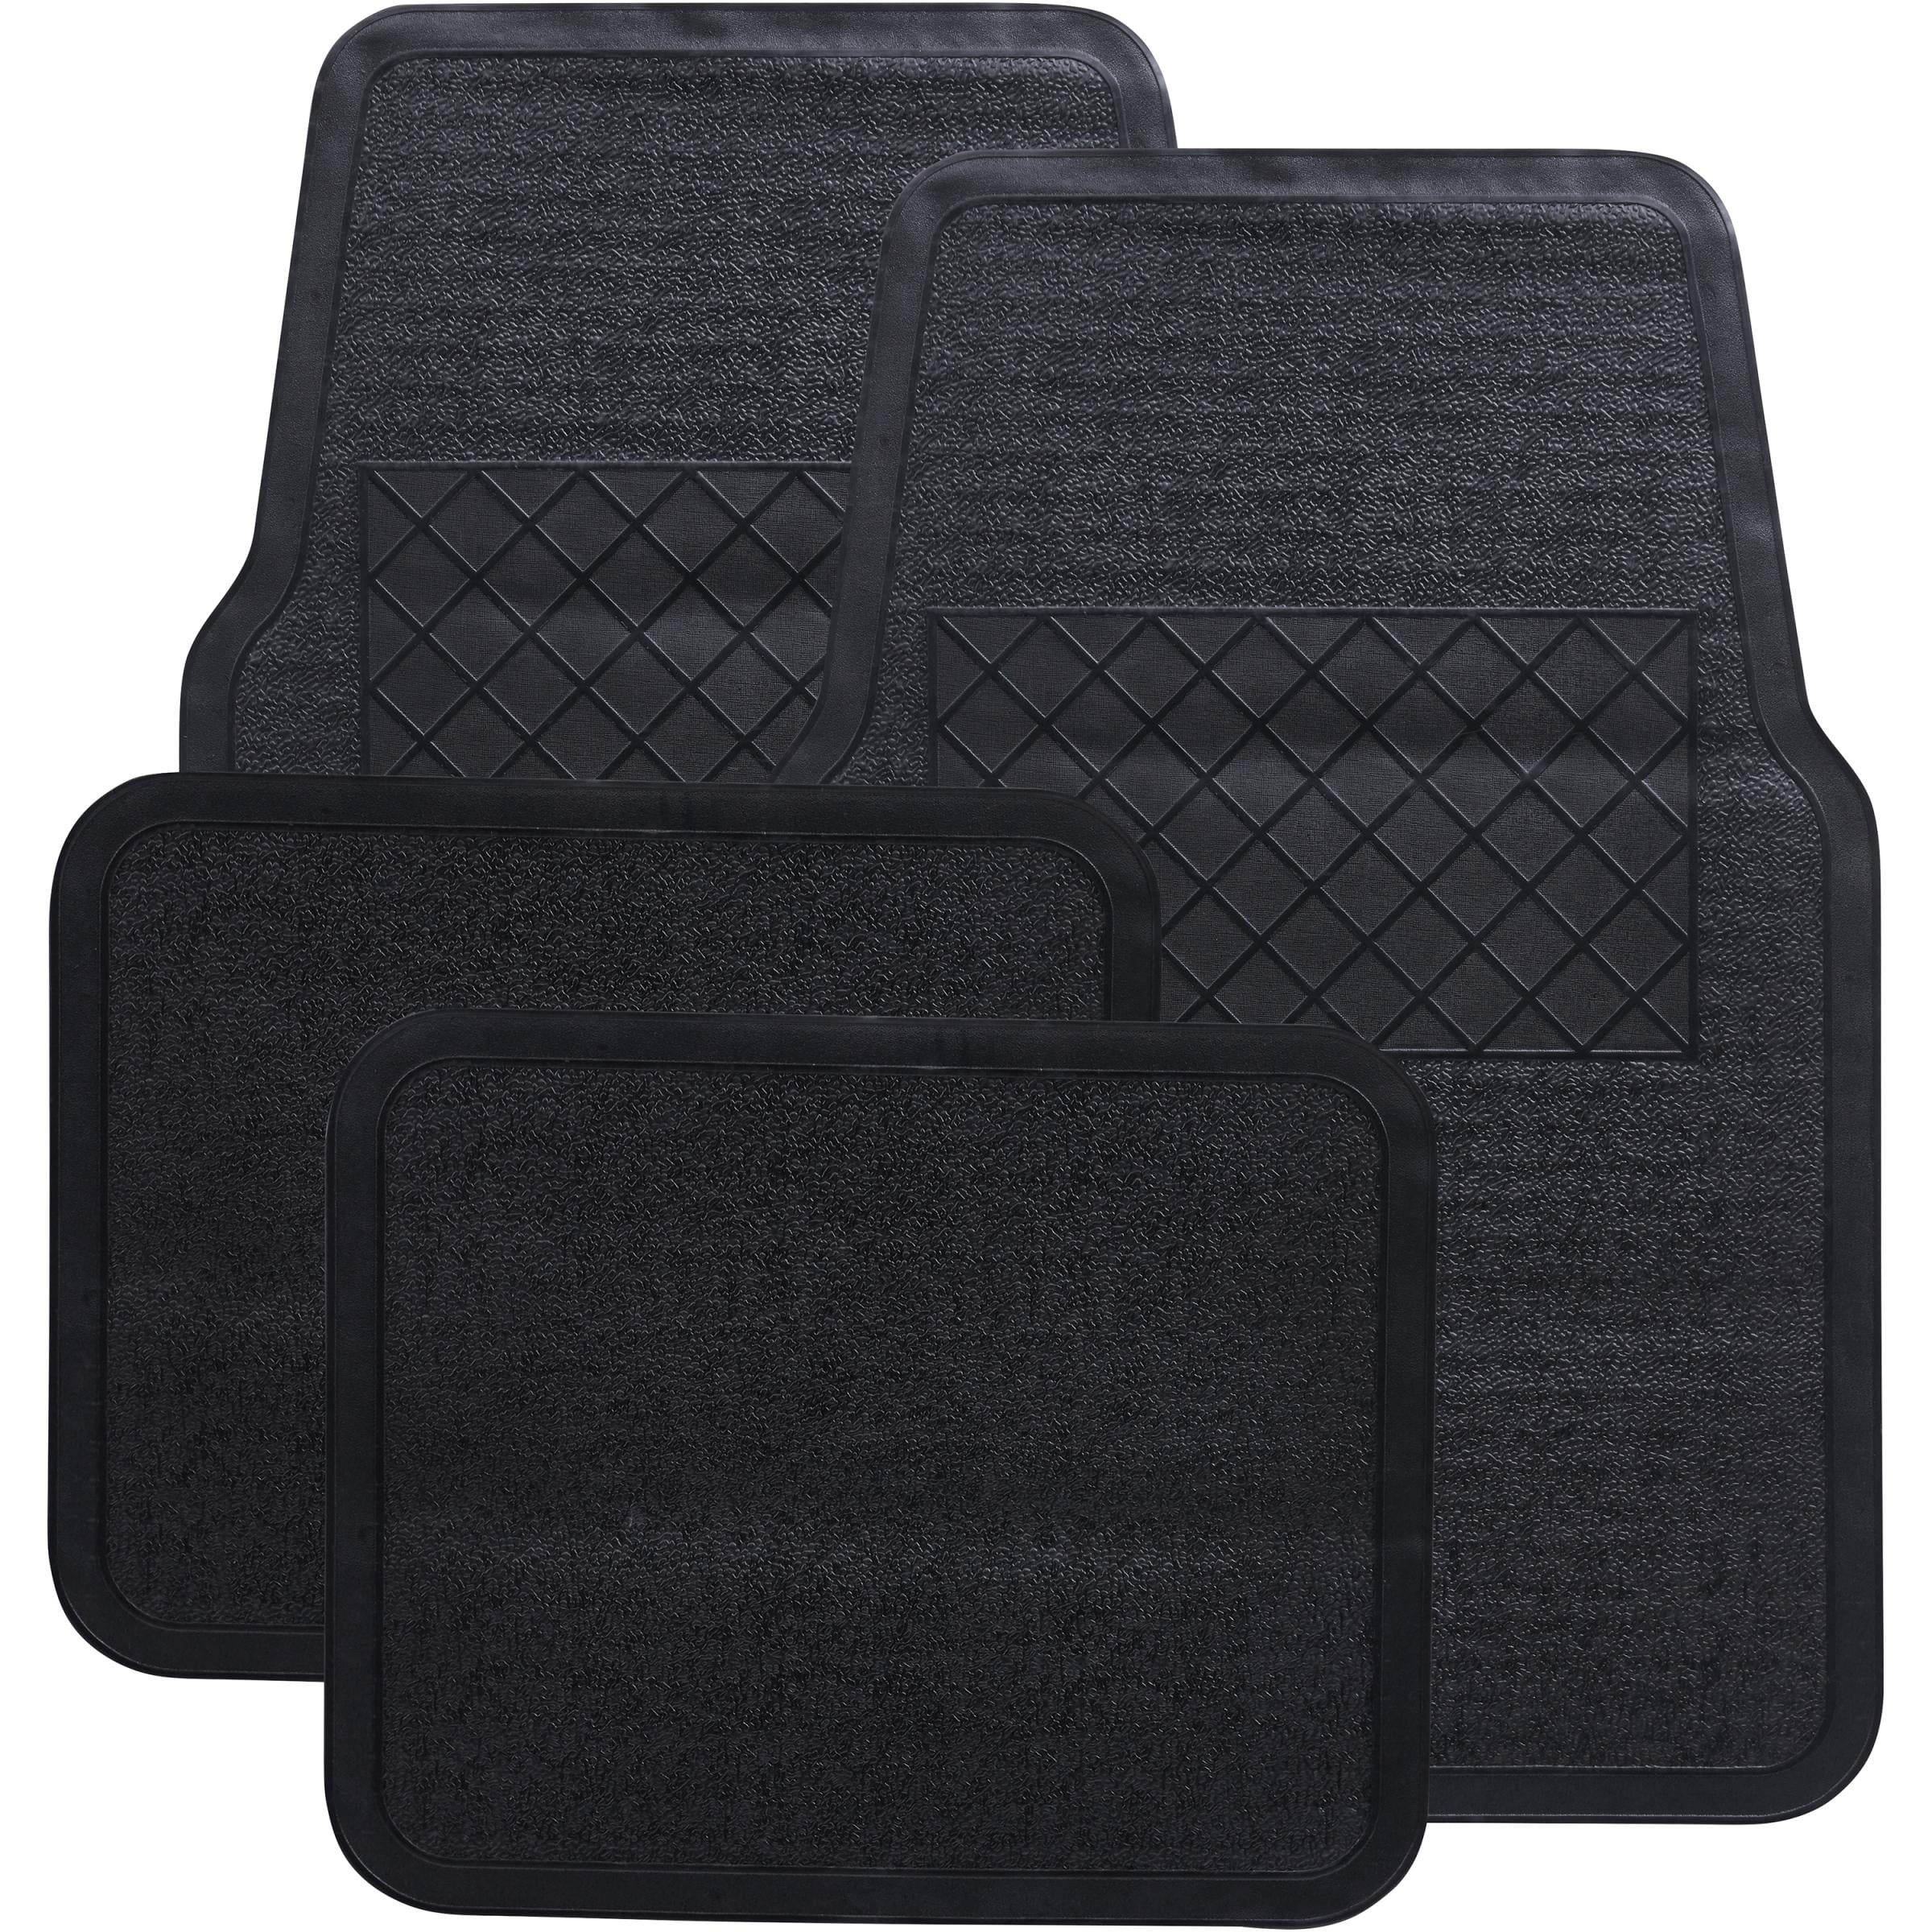 Trucks SUV Van PantsSaver Custom Fit Automotive Floor Mats fits 2019 Ford Focus All Weather Protection for Cars Heavy Duty Total Protection Black 